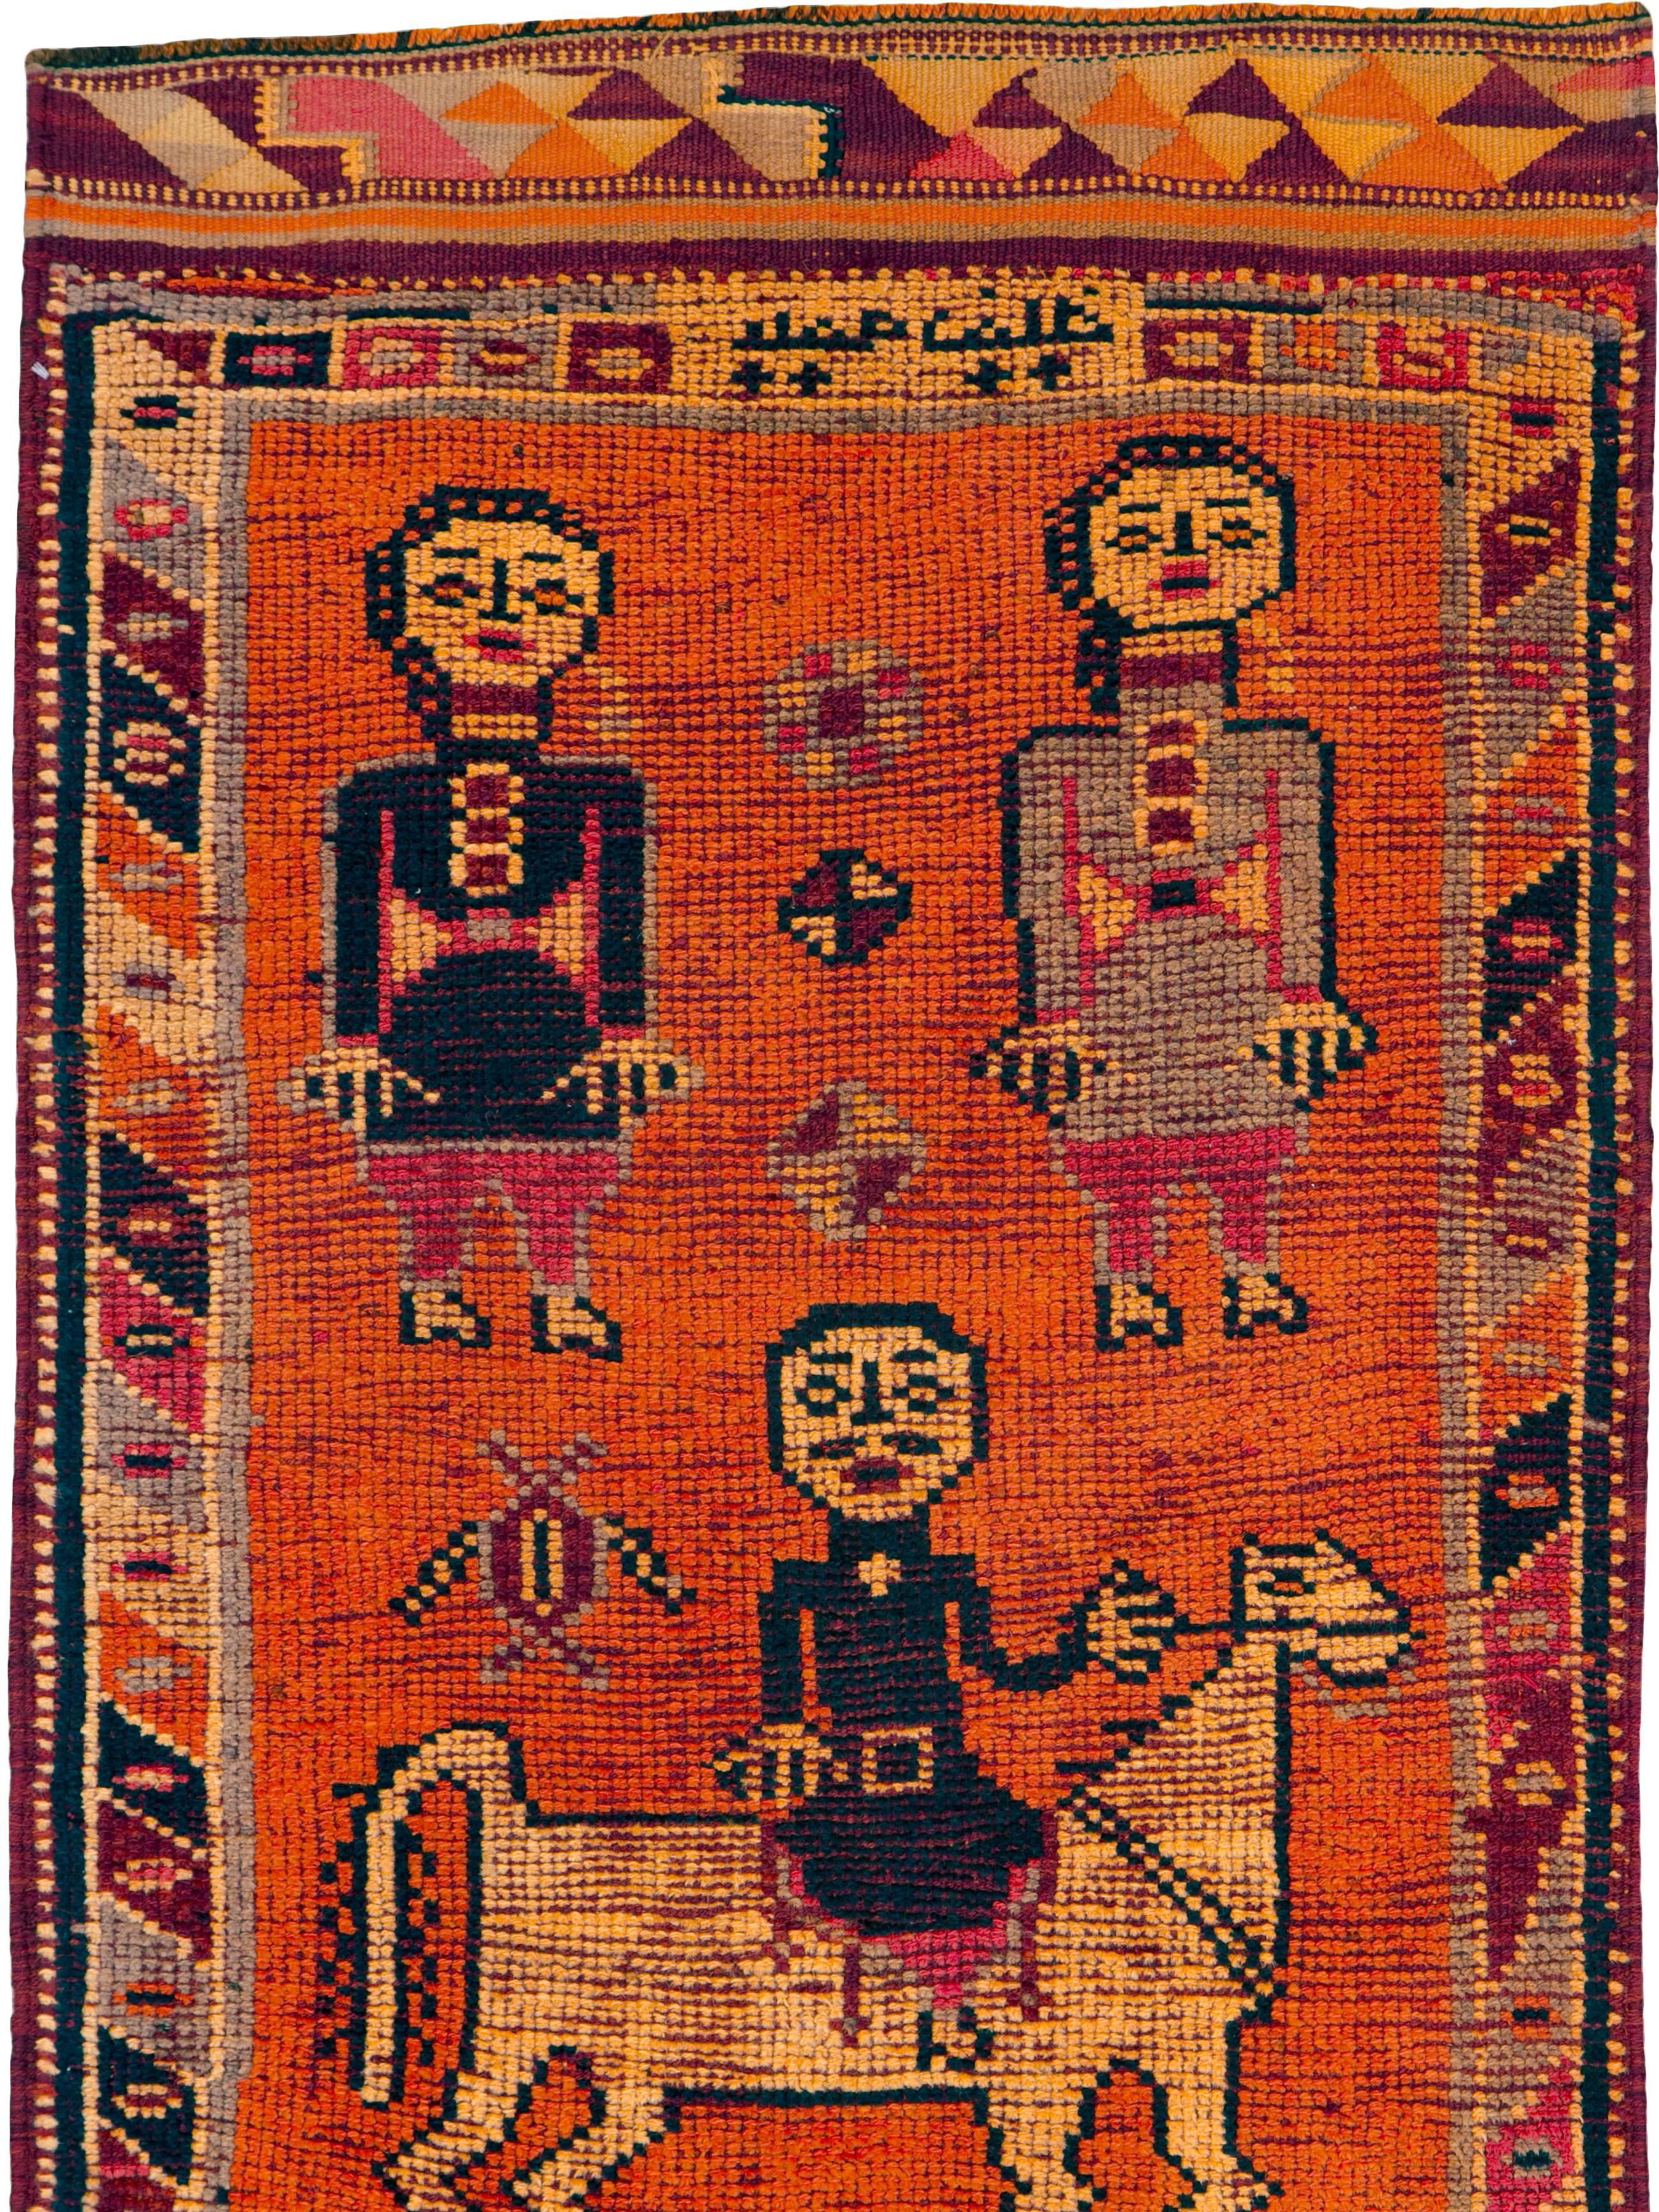 A vintage Turkish Anatolian rug, with a pictorial design and Kilim (flat-weave) ends, from the mid-20th century.

Measures: 2' 11